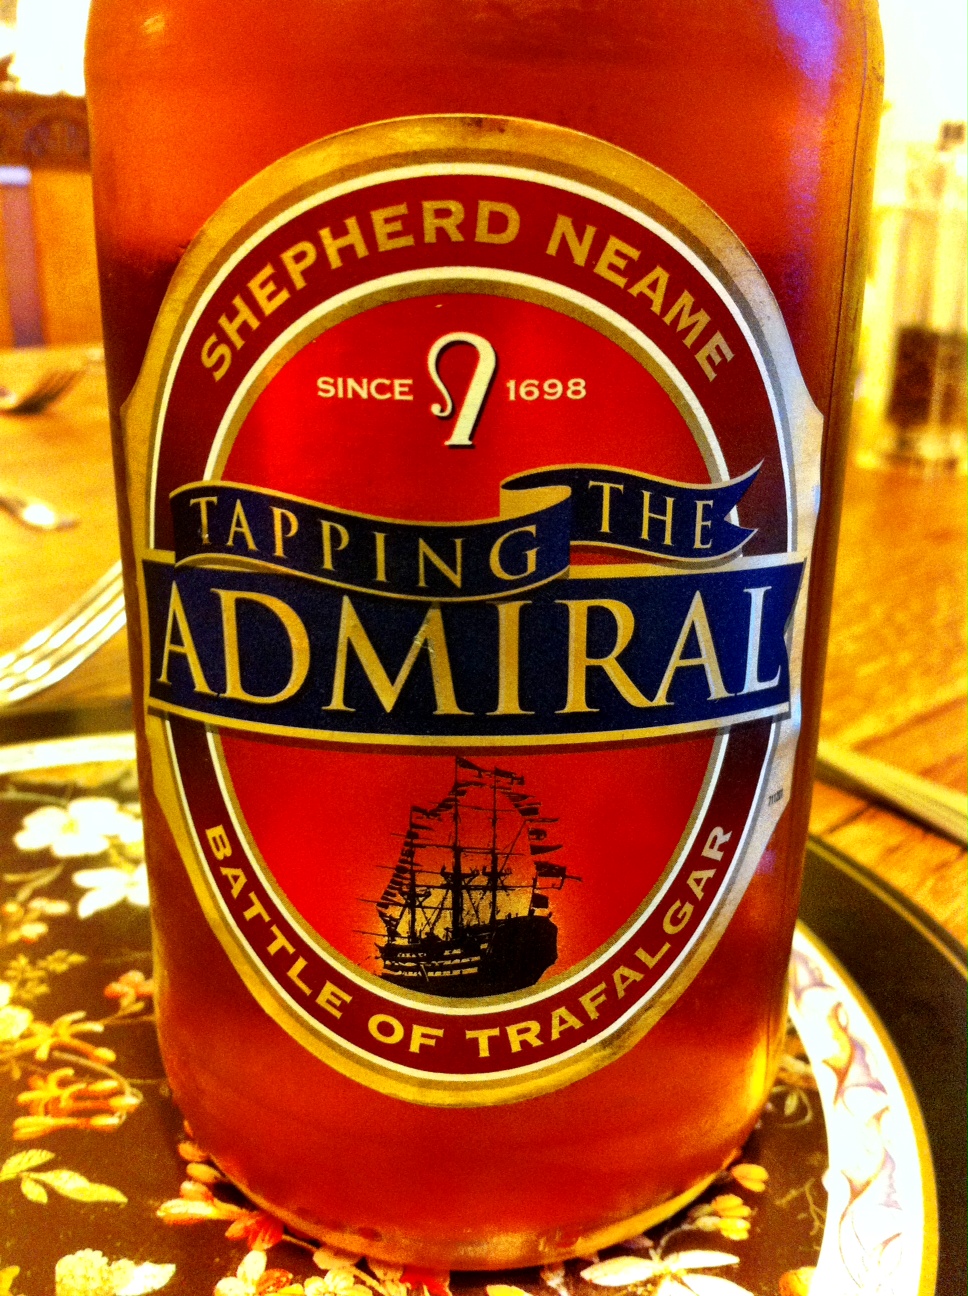 Shepherd Neame’s ‘Tapping the Admiral’